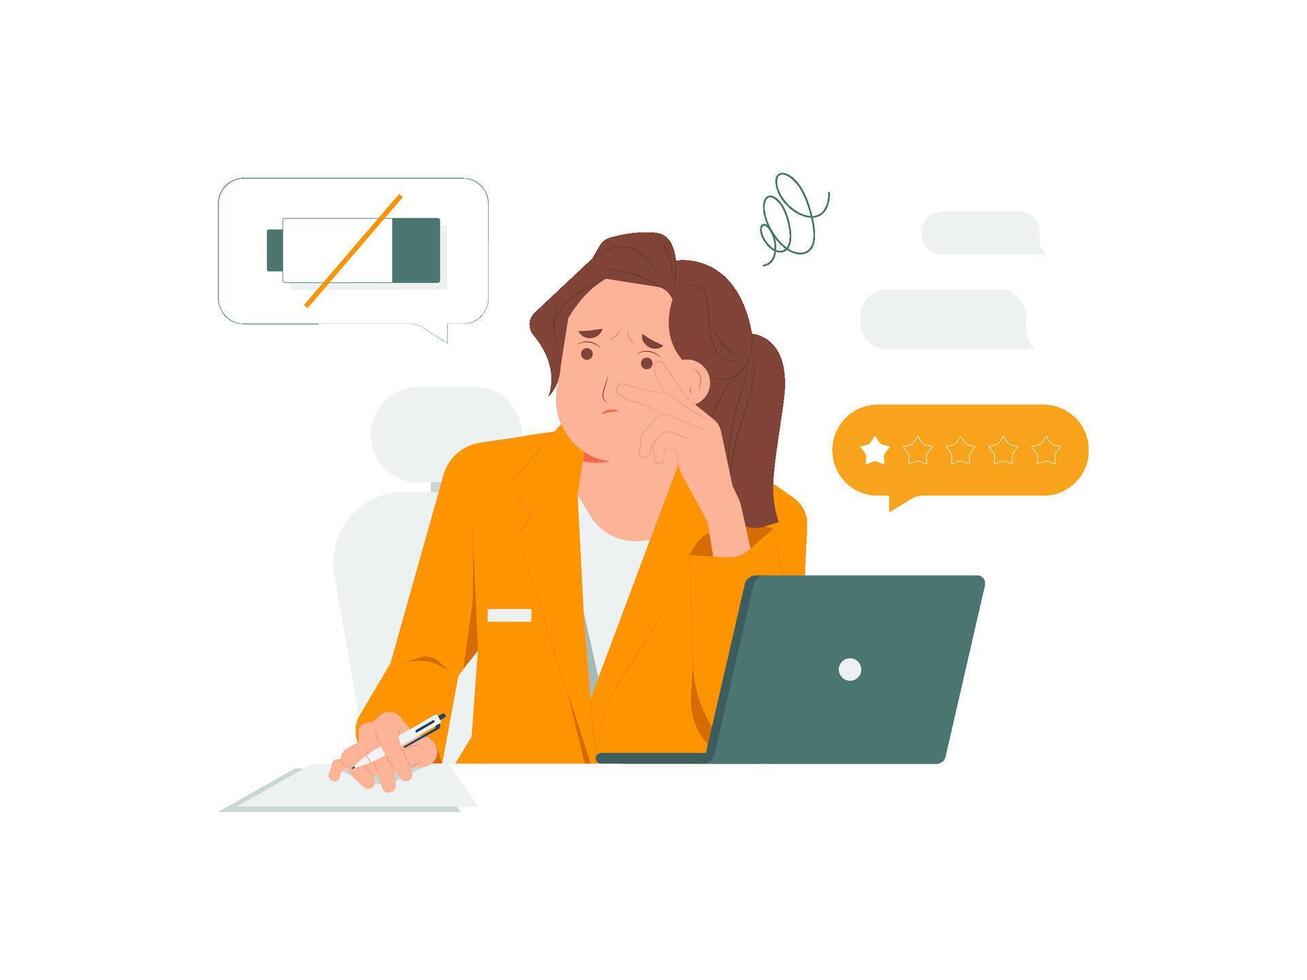 Frustrating tired female office workers employee worrying in front of a laptop, stress, tiredness, overwork concept illustration vector